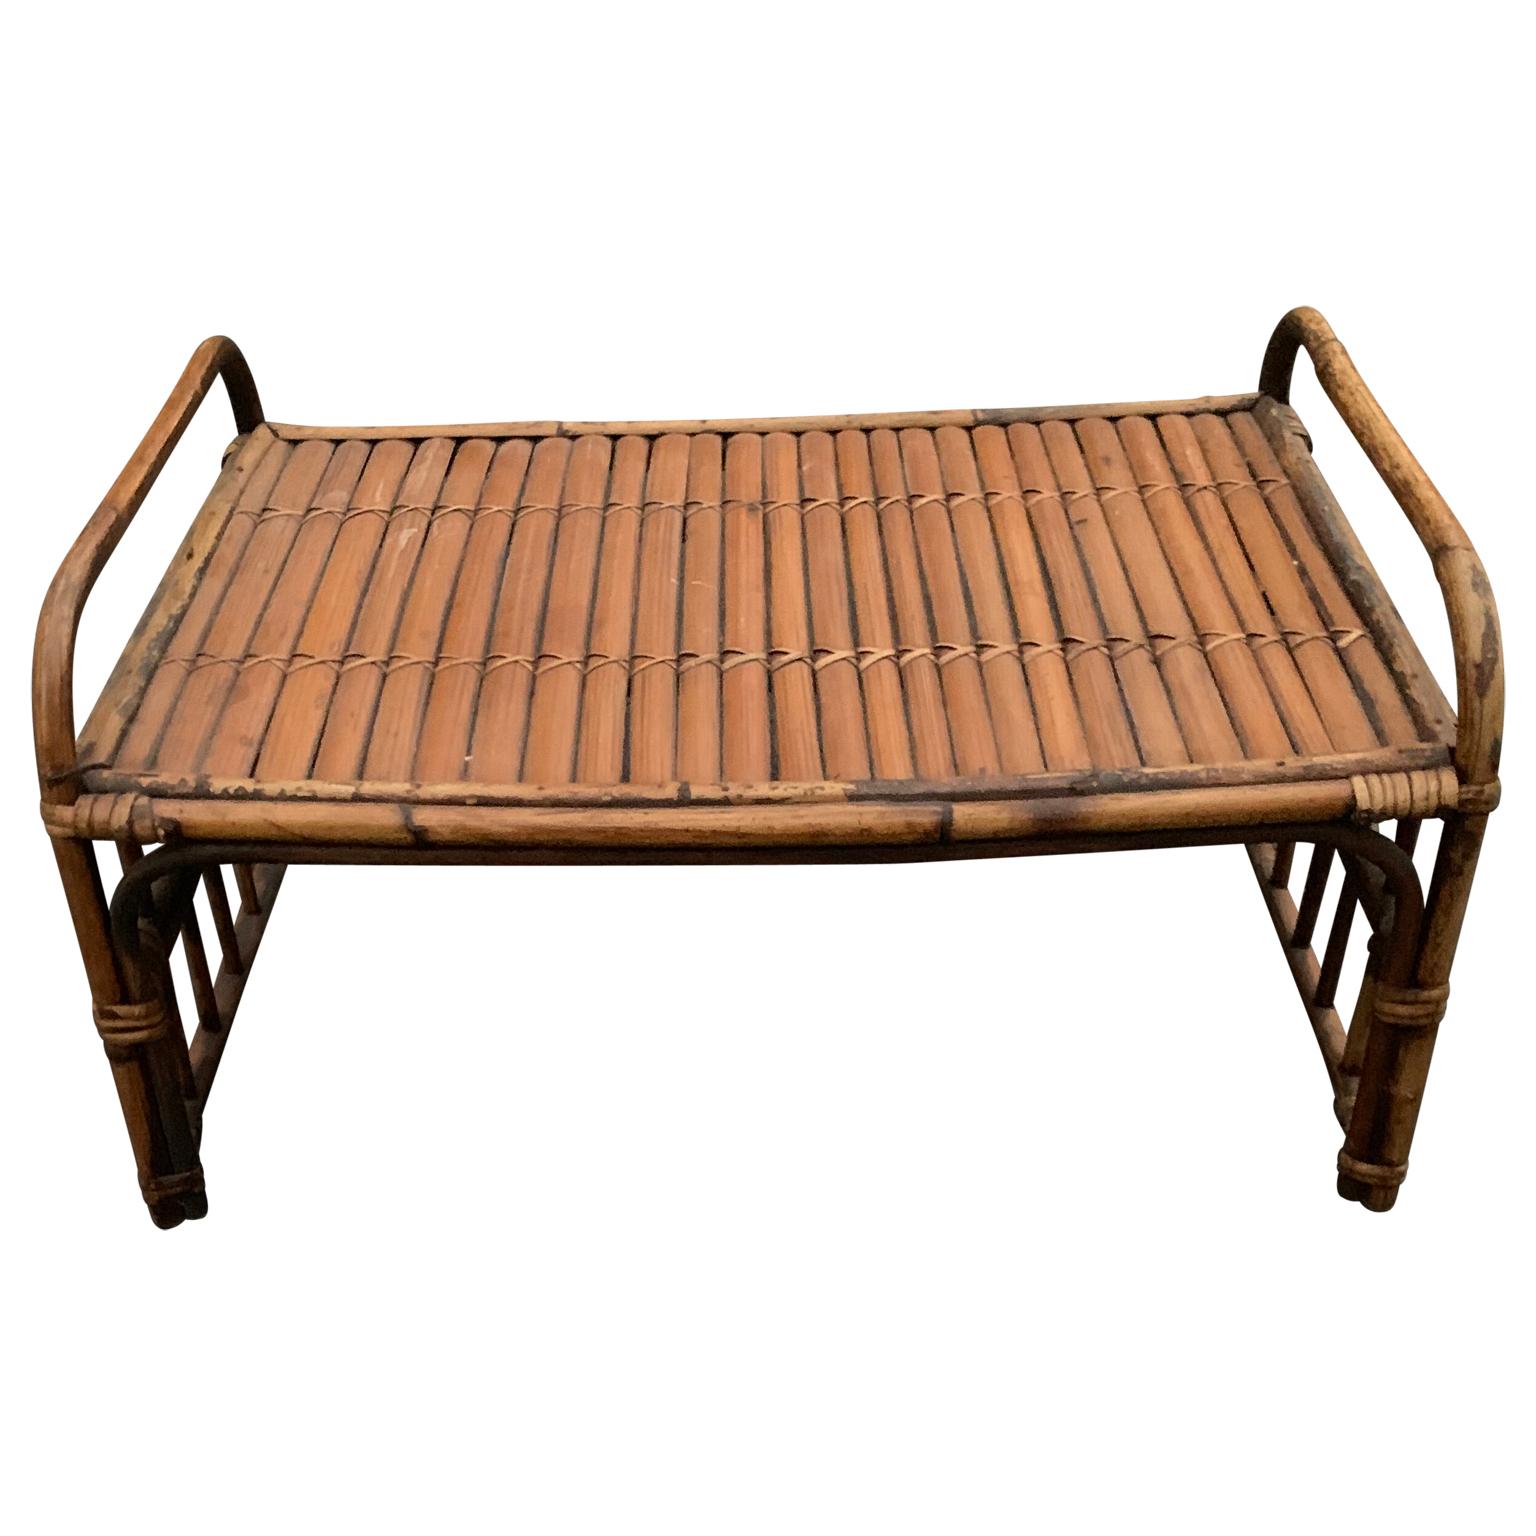 Rustic rattan bed tray.